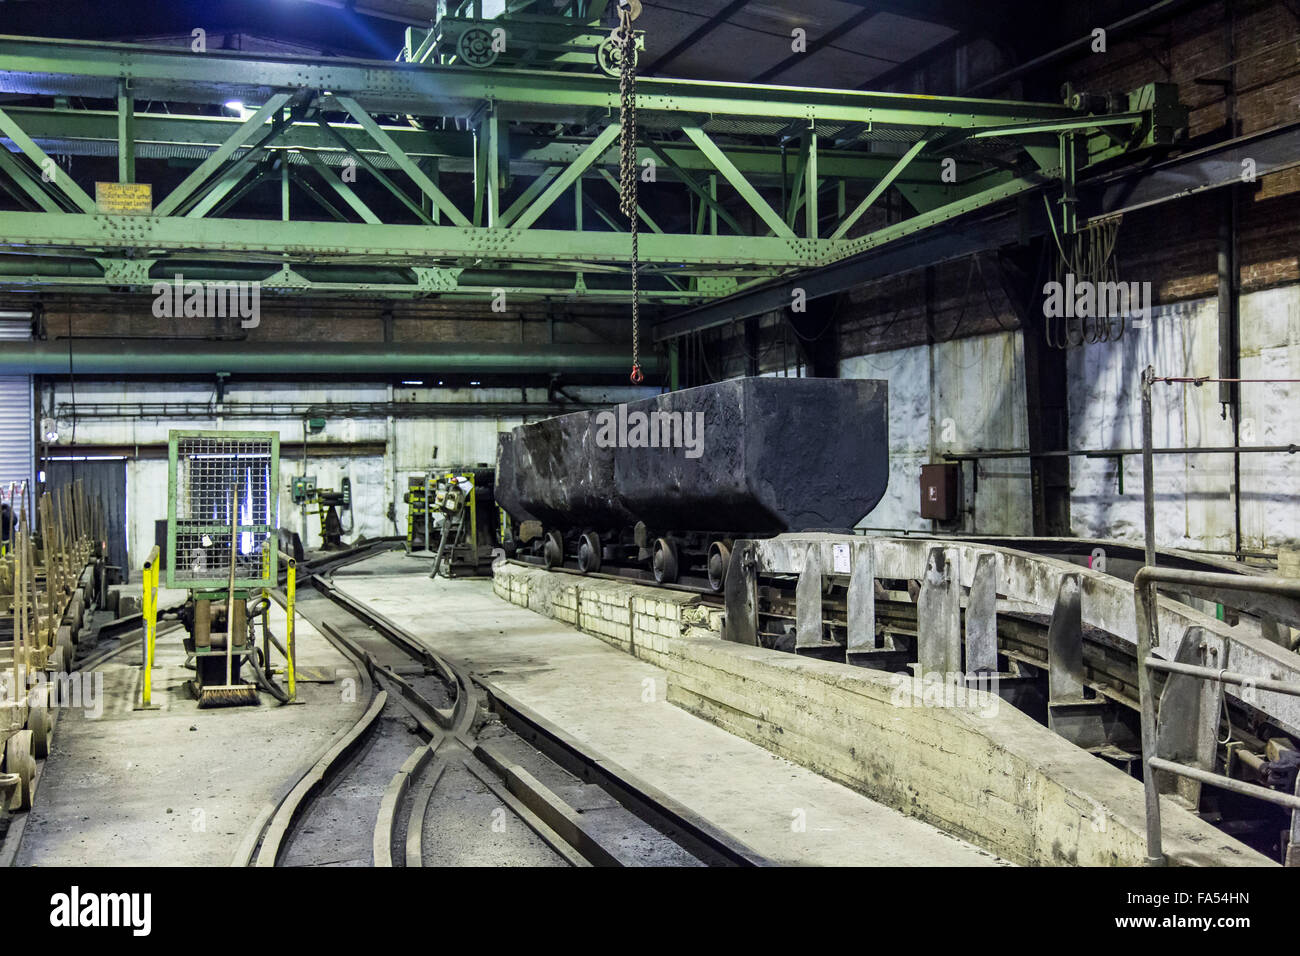 Coal mine Auguste Victoria, in Marl, Germany, mine shaft hall, with coal wagons, closed in December 2015, after 116 years Stock Photo